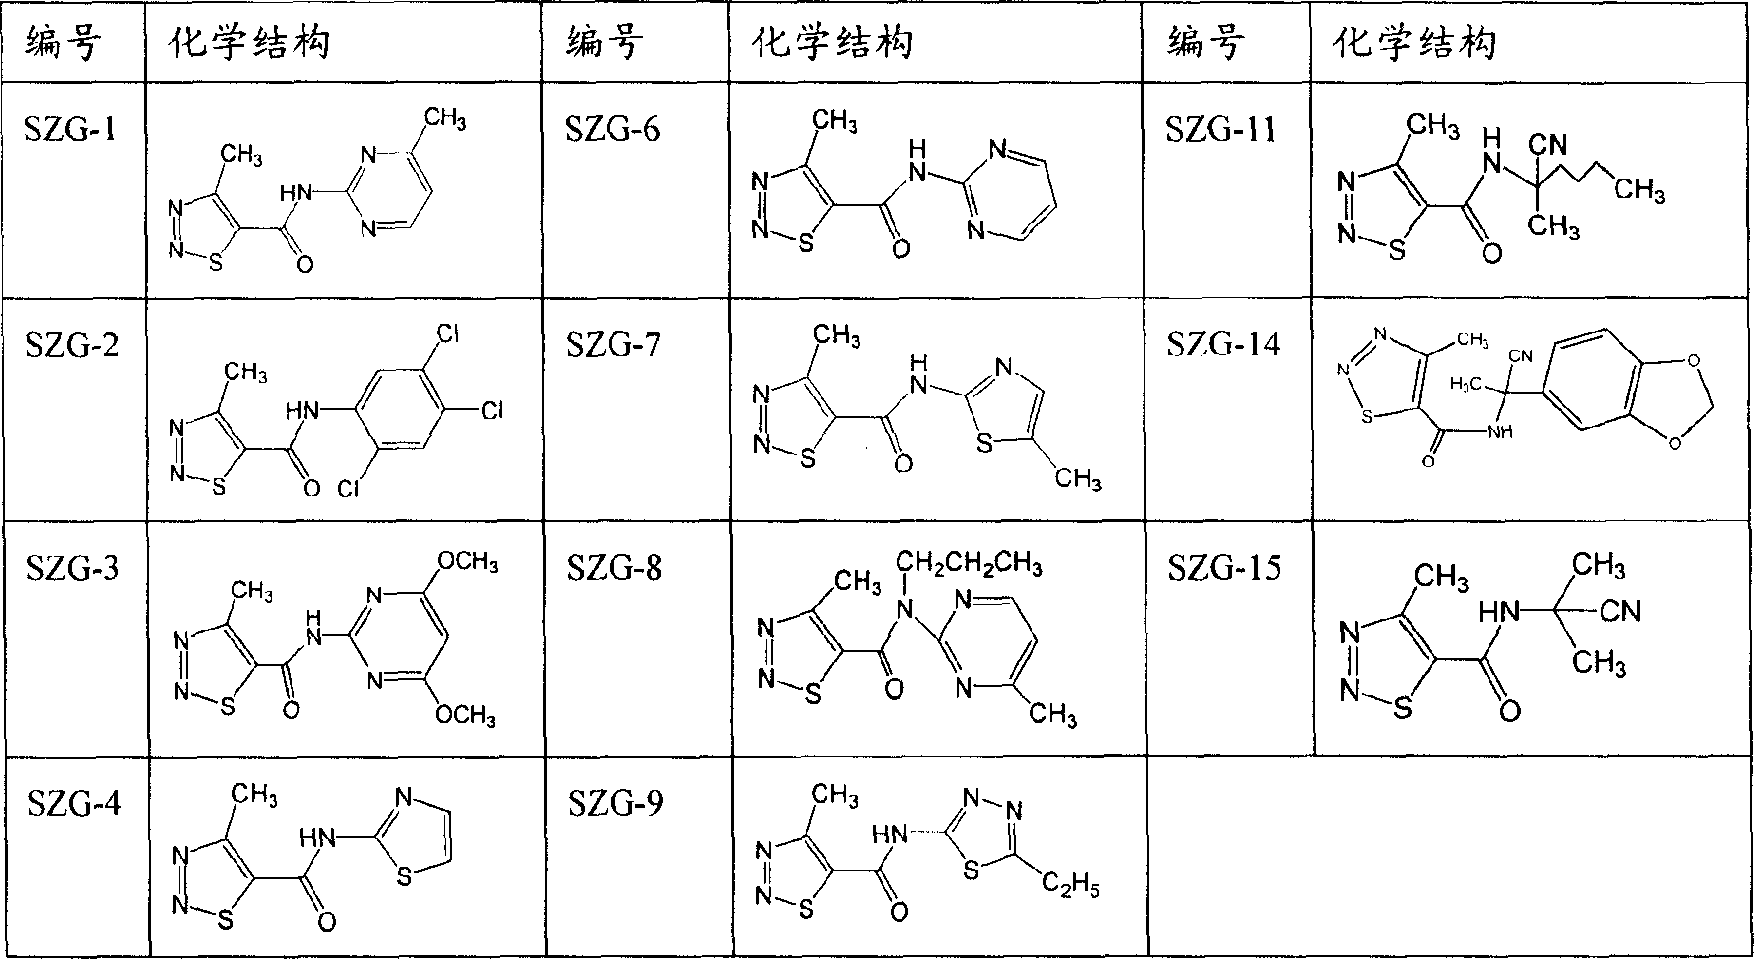 New [1,2,3]-thiobiazole derivative and its synthesis and use